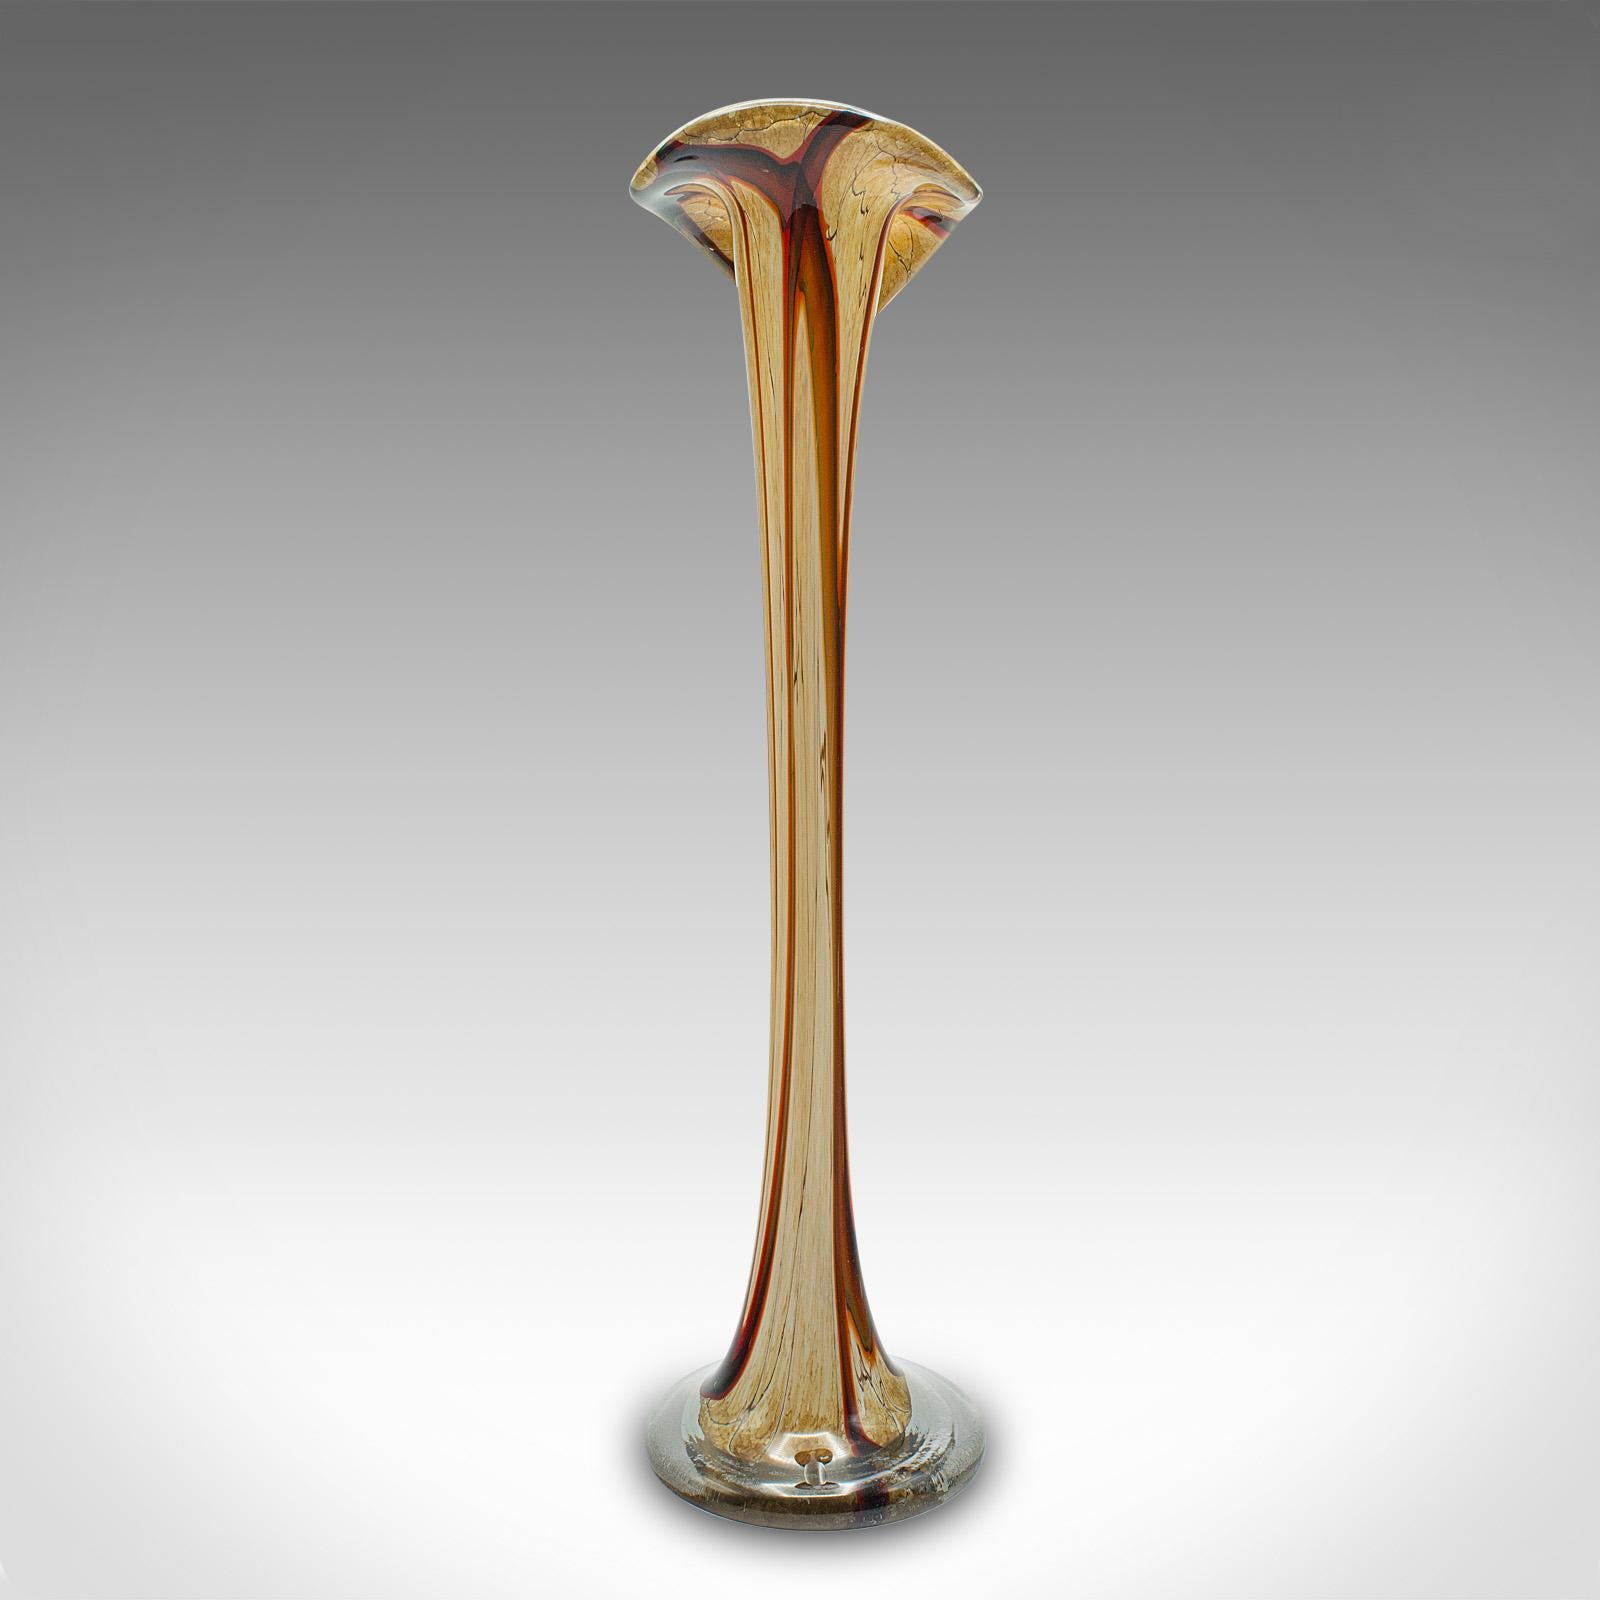 Tall Vintage Stem Vase, Italian, Murano Glass Flower Sleeve, Mid Century, C.1960 In Good Condition For Sale In Hele, Devon, GB